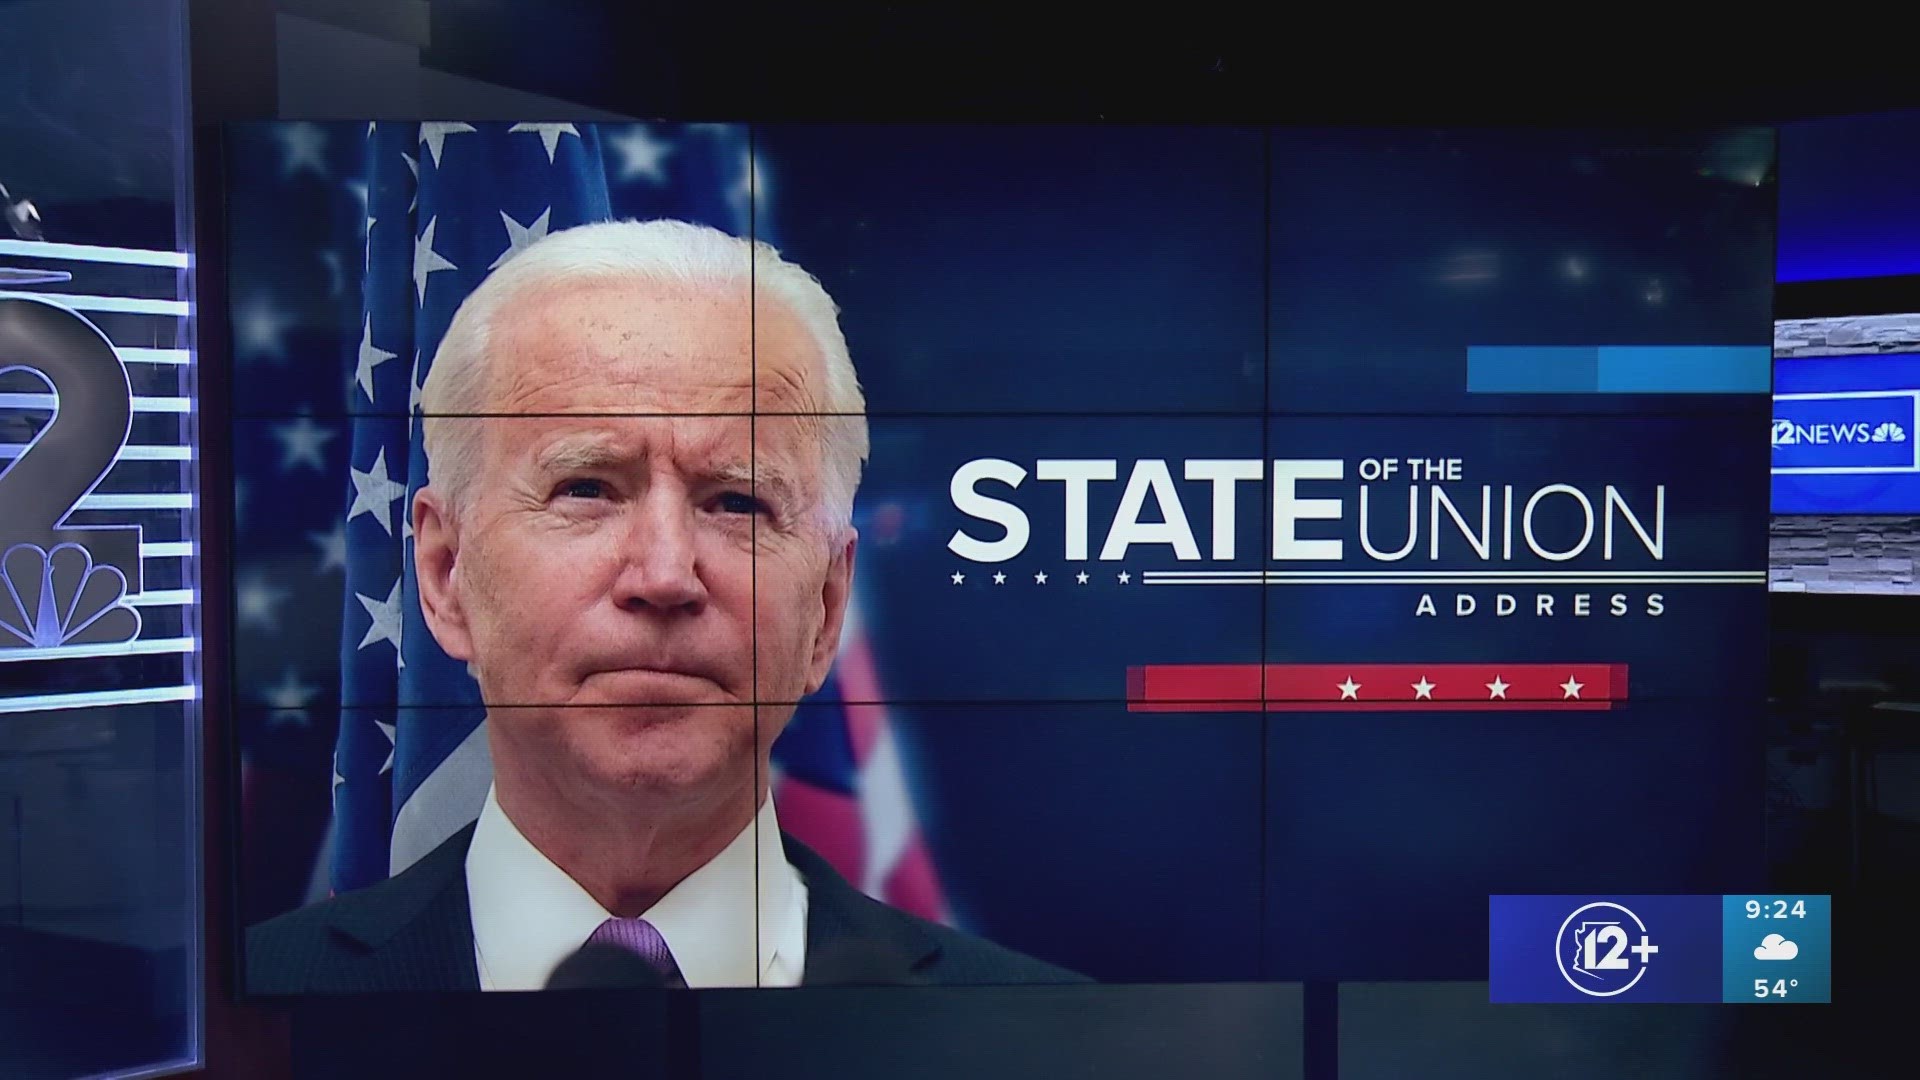 Biden discussed the war in Ukraine, social security, reproductive rights and much more.